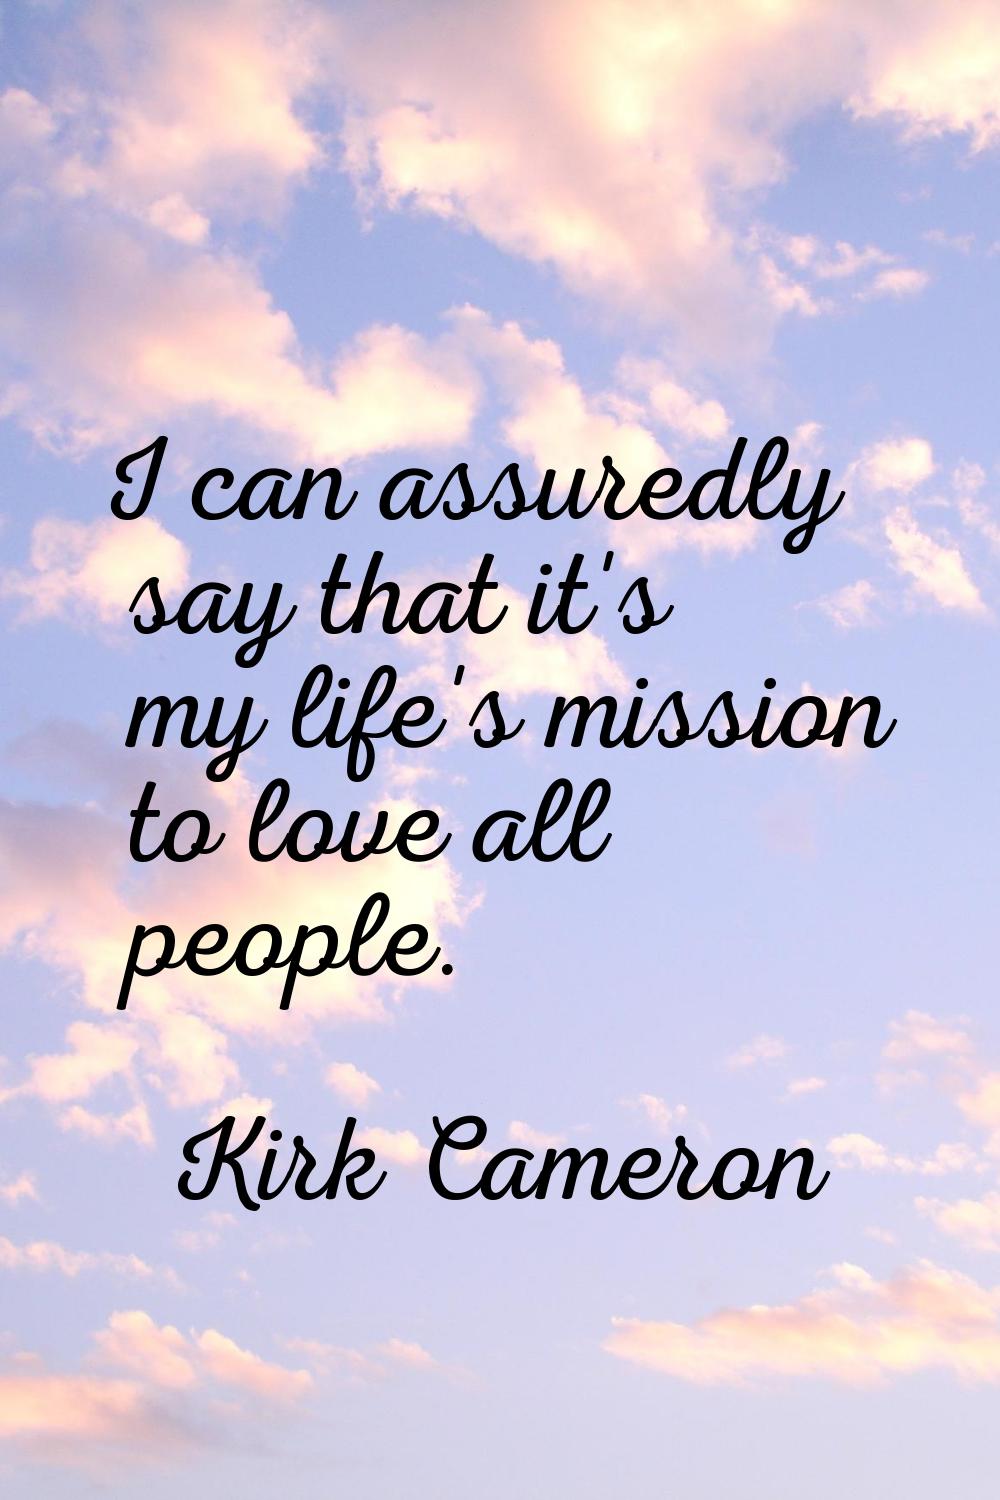 I can assuredly say that it's my life's mission to love all people.